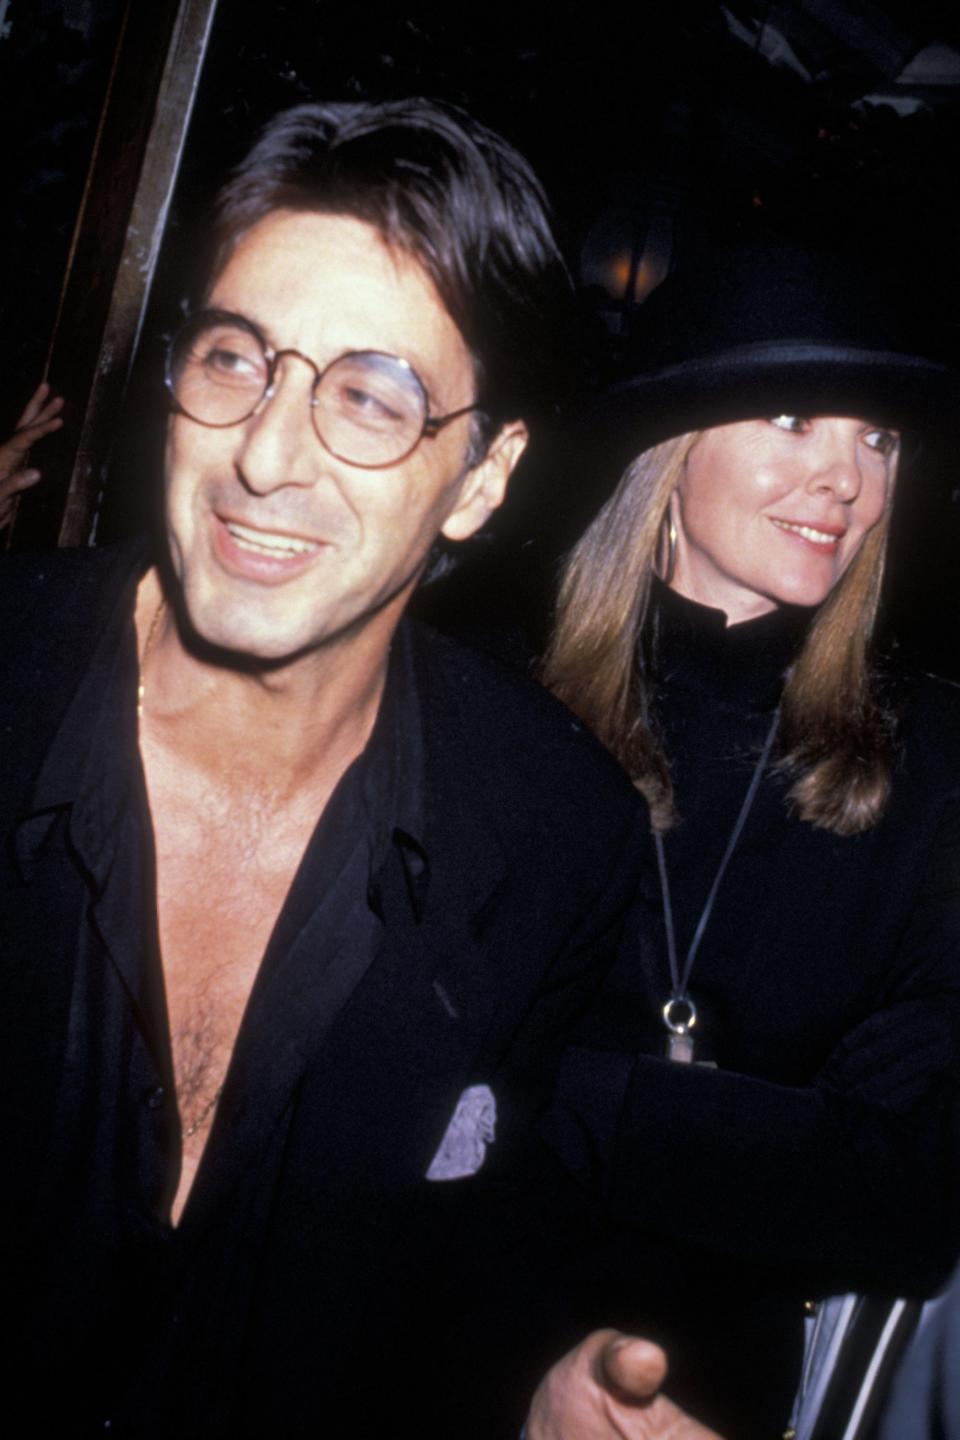 Pacino and Diane Keaton attend the premiere party for 'Sea of Love' on September 12, 1989, at Tavern on the Green in New York City.